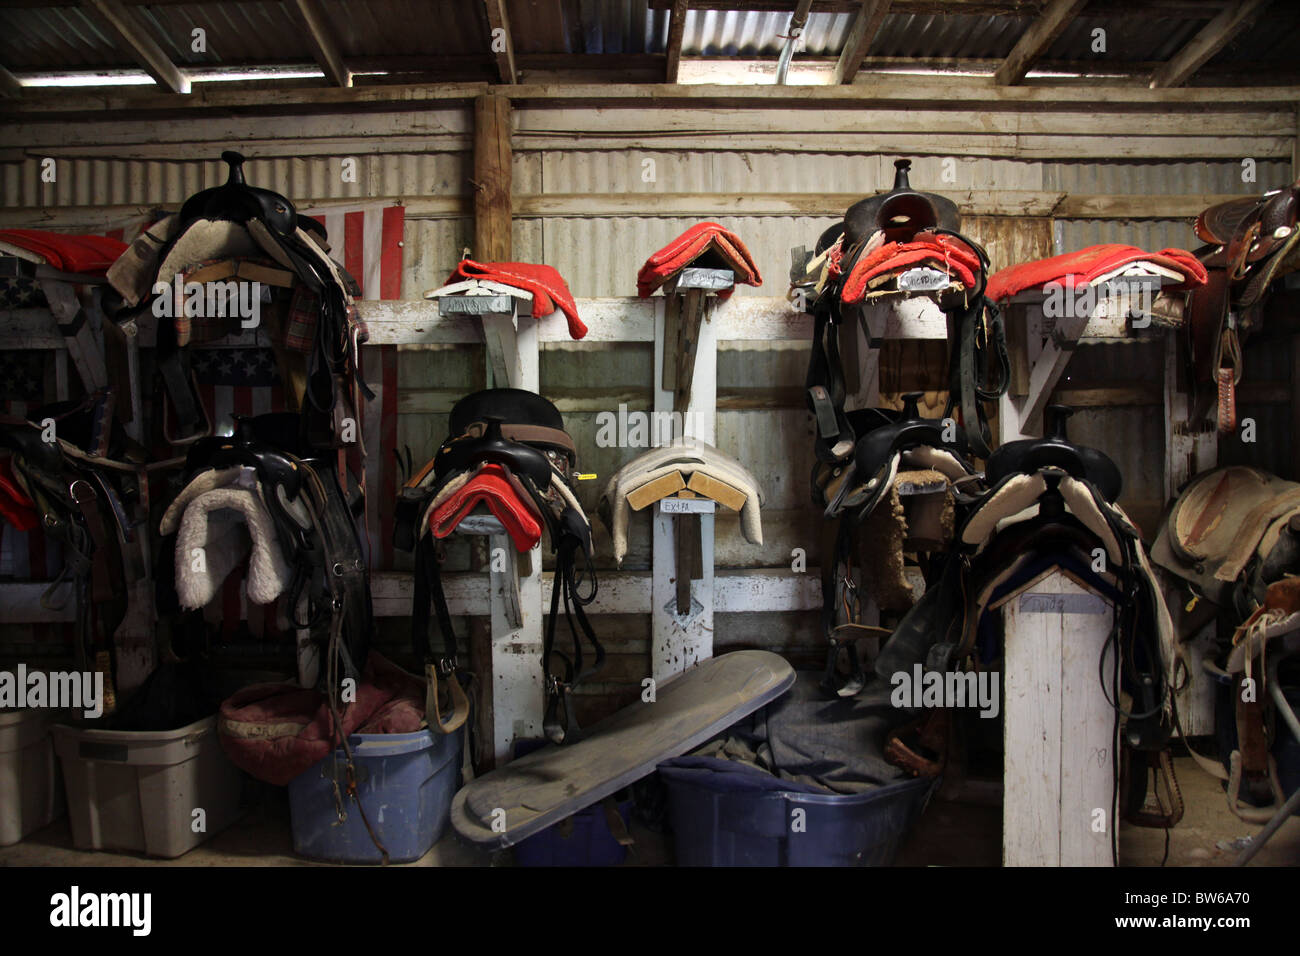 Western saddles being stored after use Stock Photo